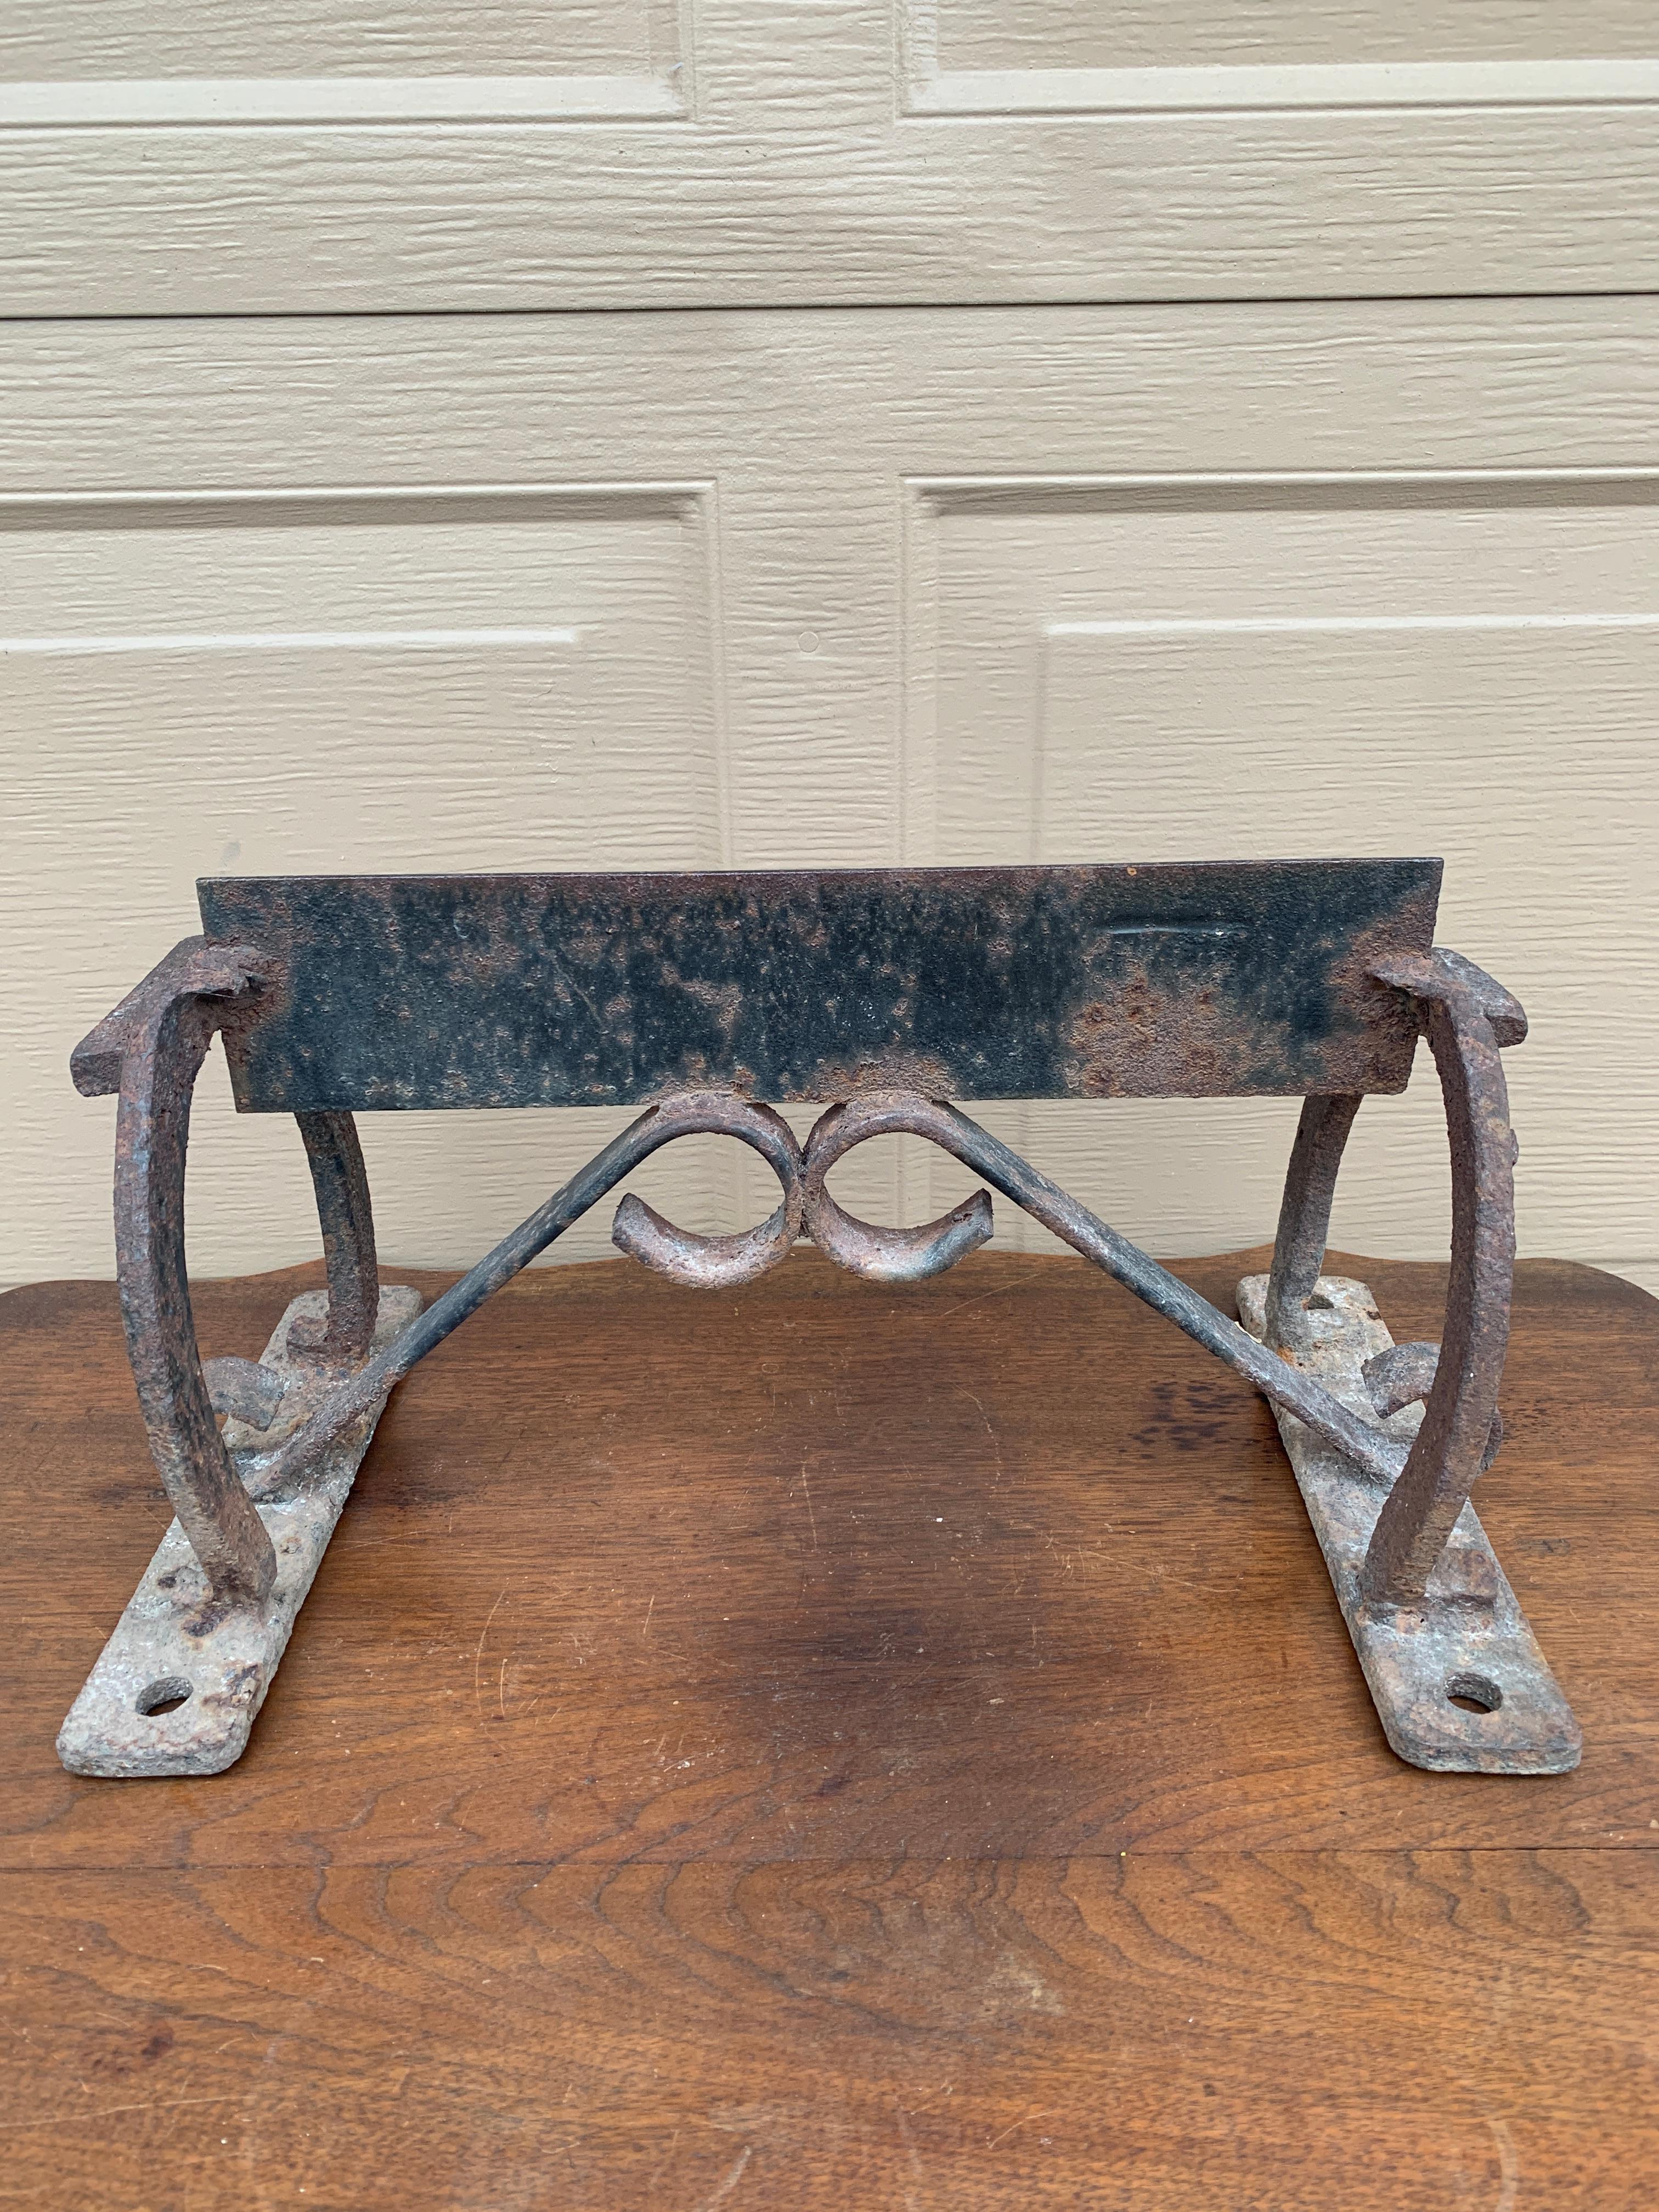 A beautiful rustic, farmhouse equestrian antique cast iron horseshoe boot scrape perfect for your country house, ranch, or stables.

USA, Early 20th Century

Measuers: 17